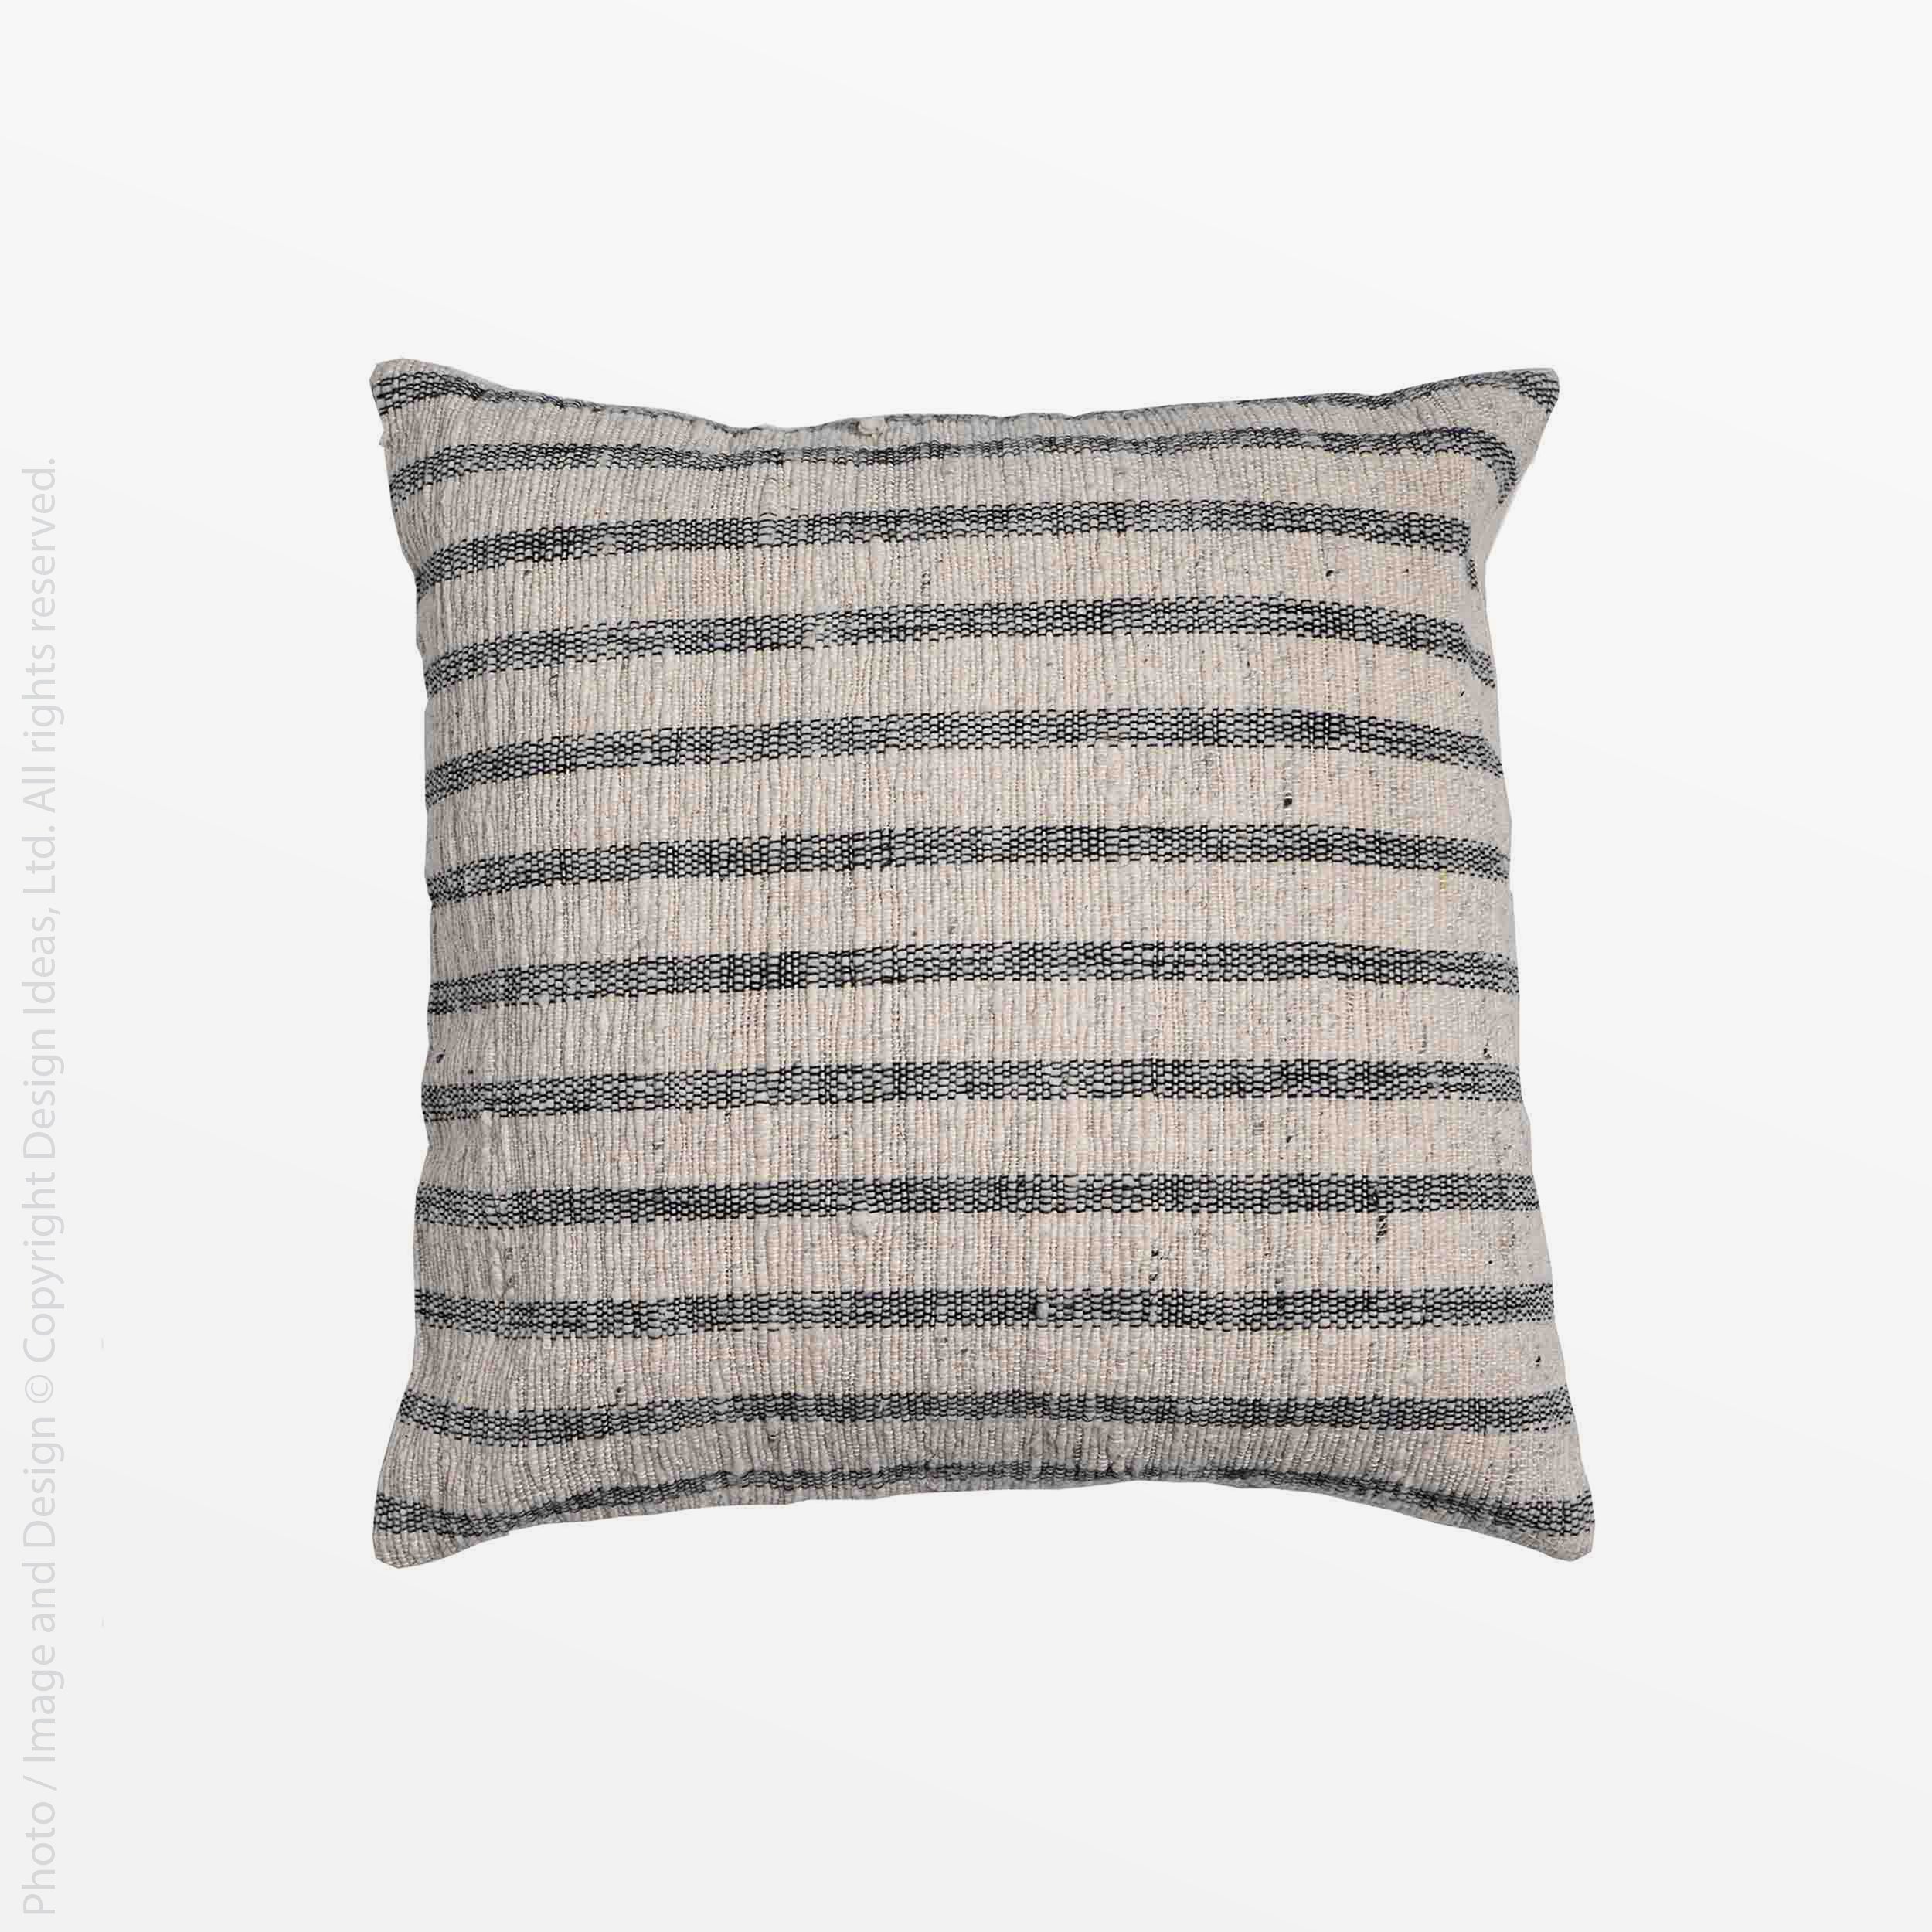 Rakku™ cushion cover - Natural | Image 1 | Premium Cushion cover from the Rakku collection | made with Cotton for long lasting use | texxture